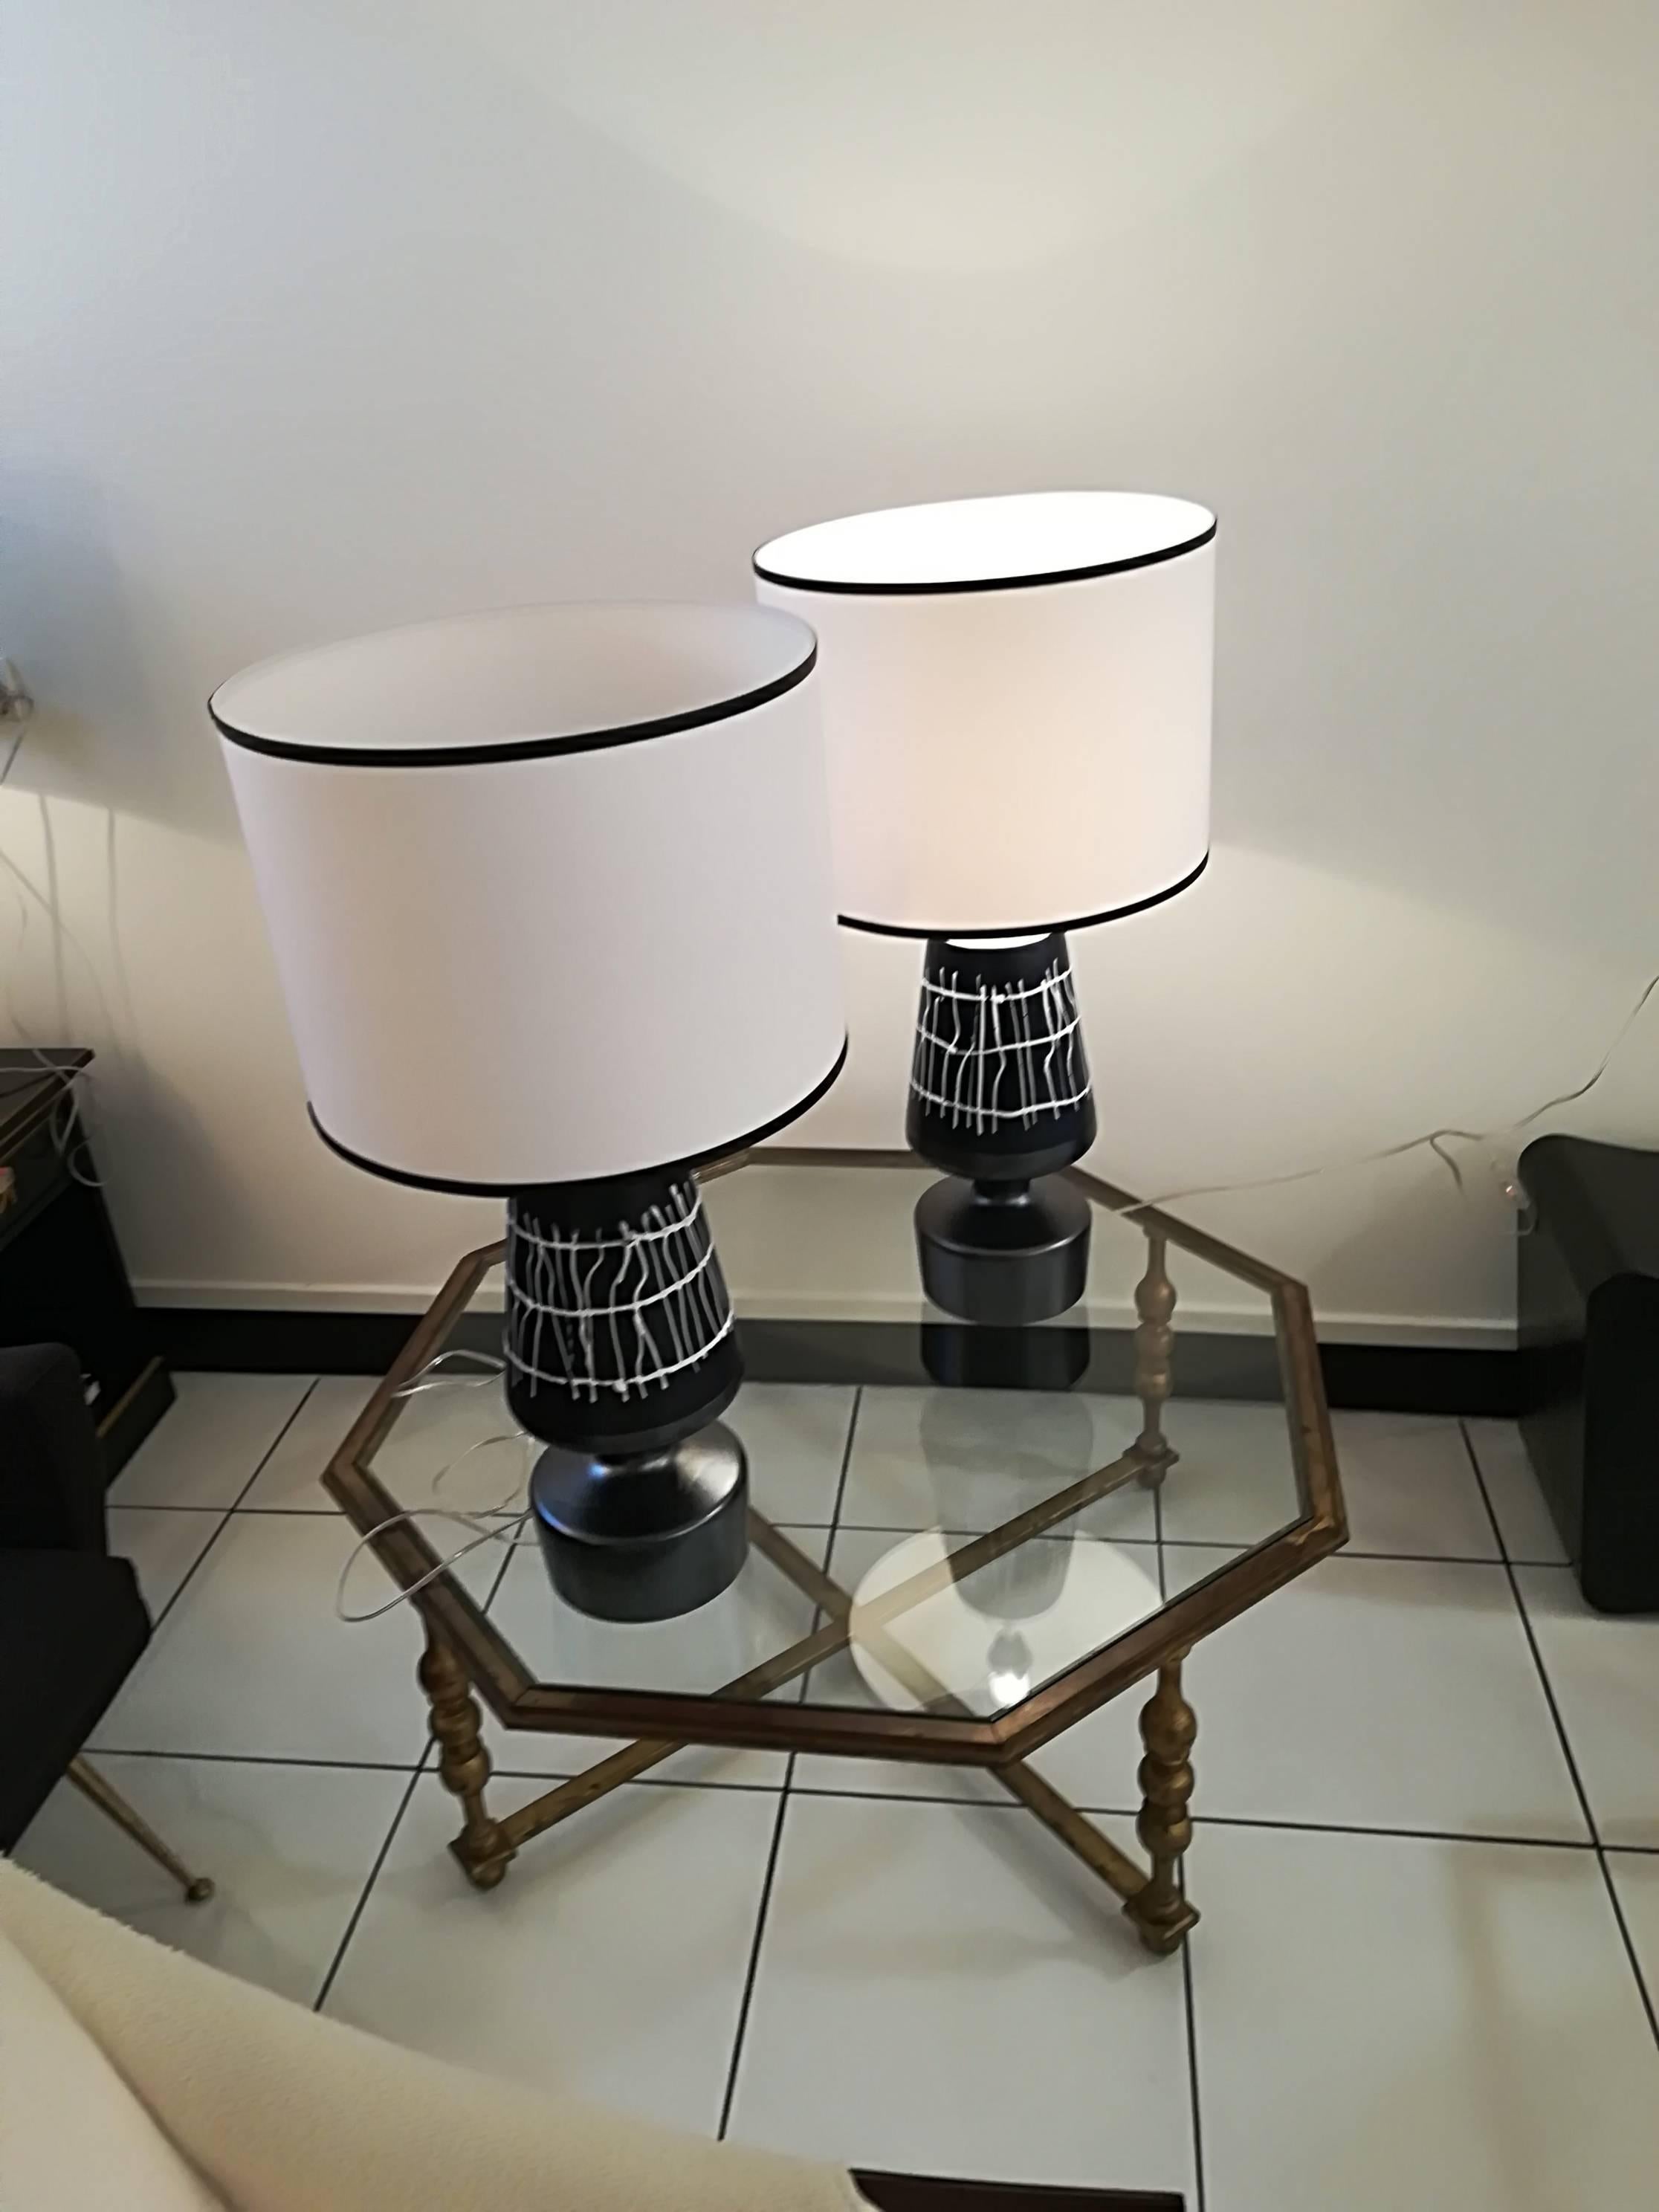 Pair Of French Ceramic Table Lamps, hand made, each decor is slightly different, 
elegant lampshades provided
Lamp base :55cmx18cm